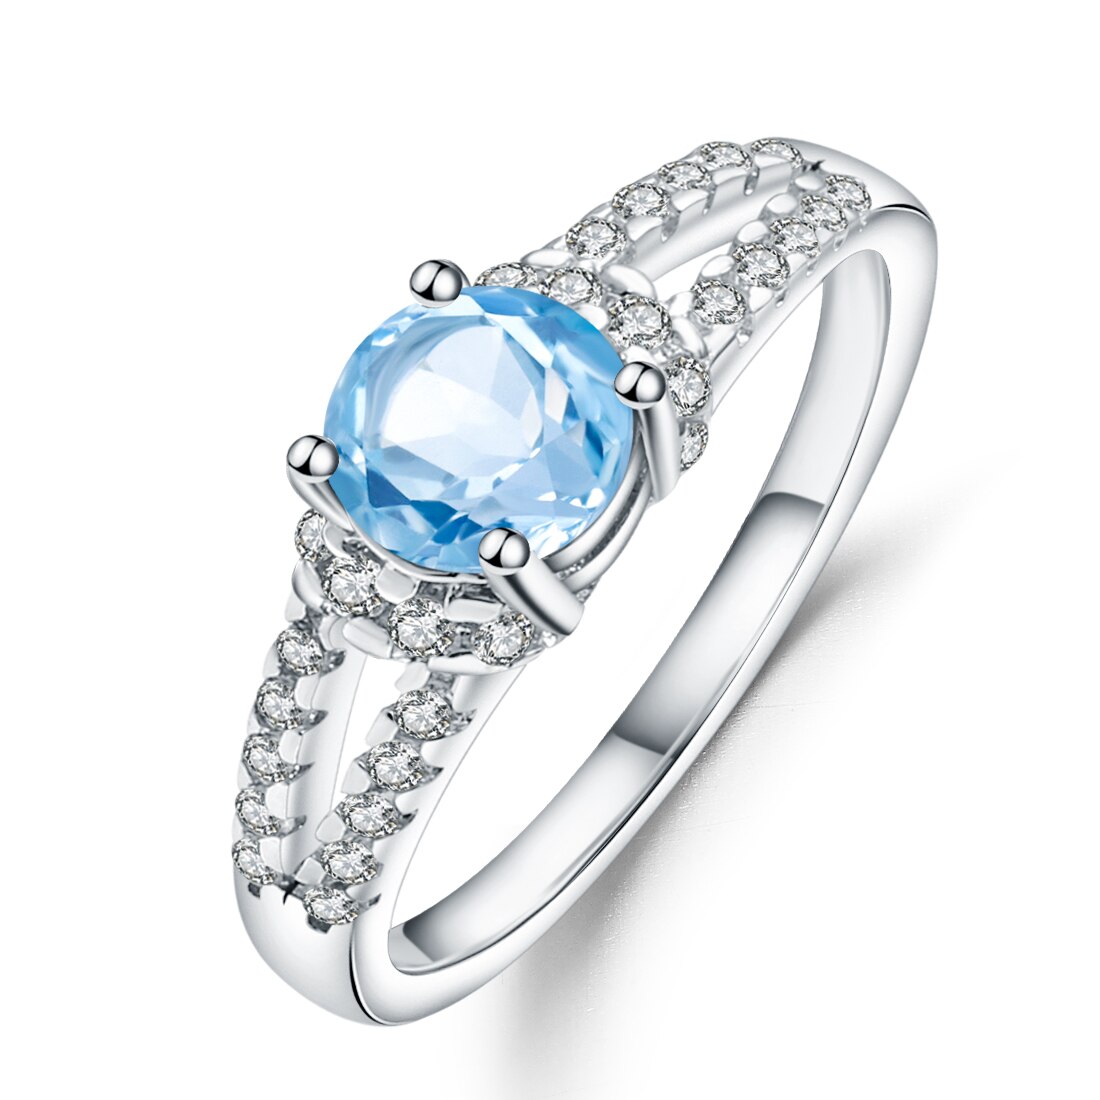 GEM&#39;S BALLET Pure 925 Sterling Silver Vintage Rings Round 1.31Ct Natural Blue Sapphire Gemstone Ring for Women Wedding Jewelry Swiss Blue Topaz|925 Sterling Silver